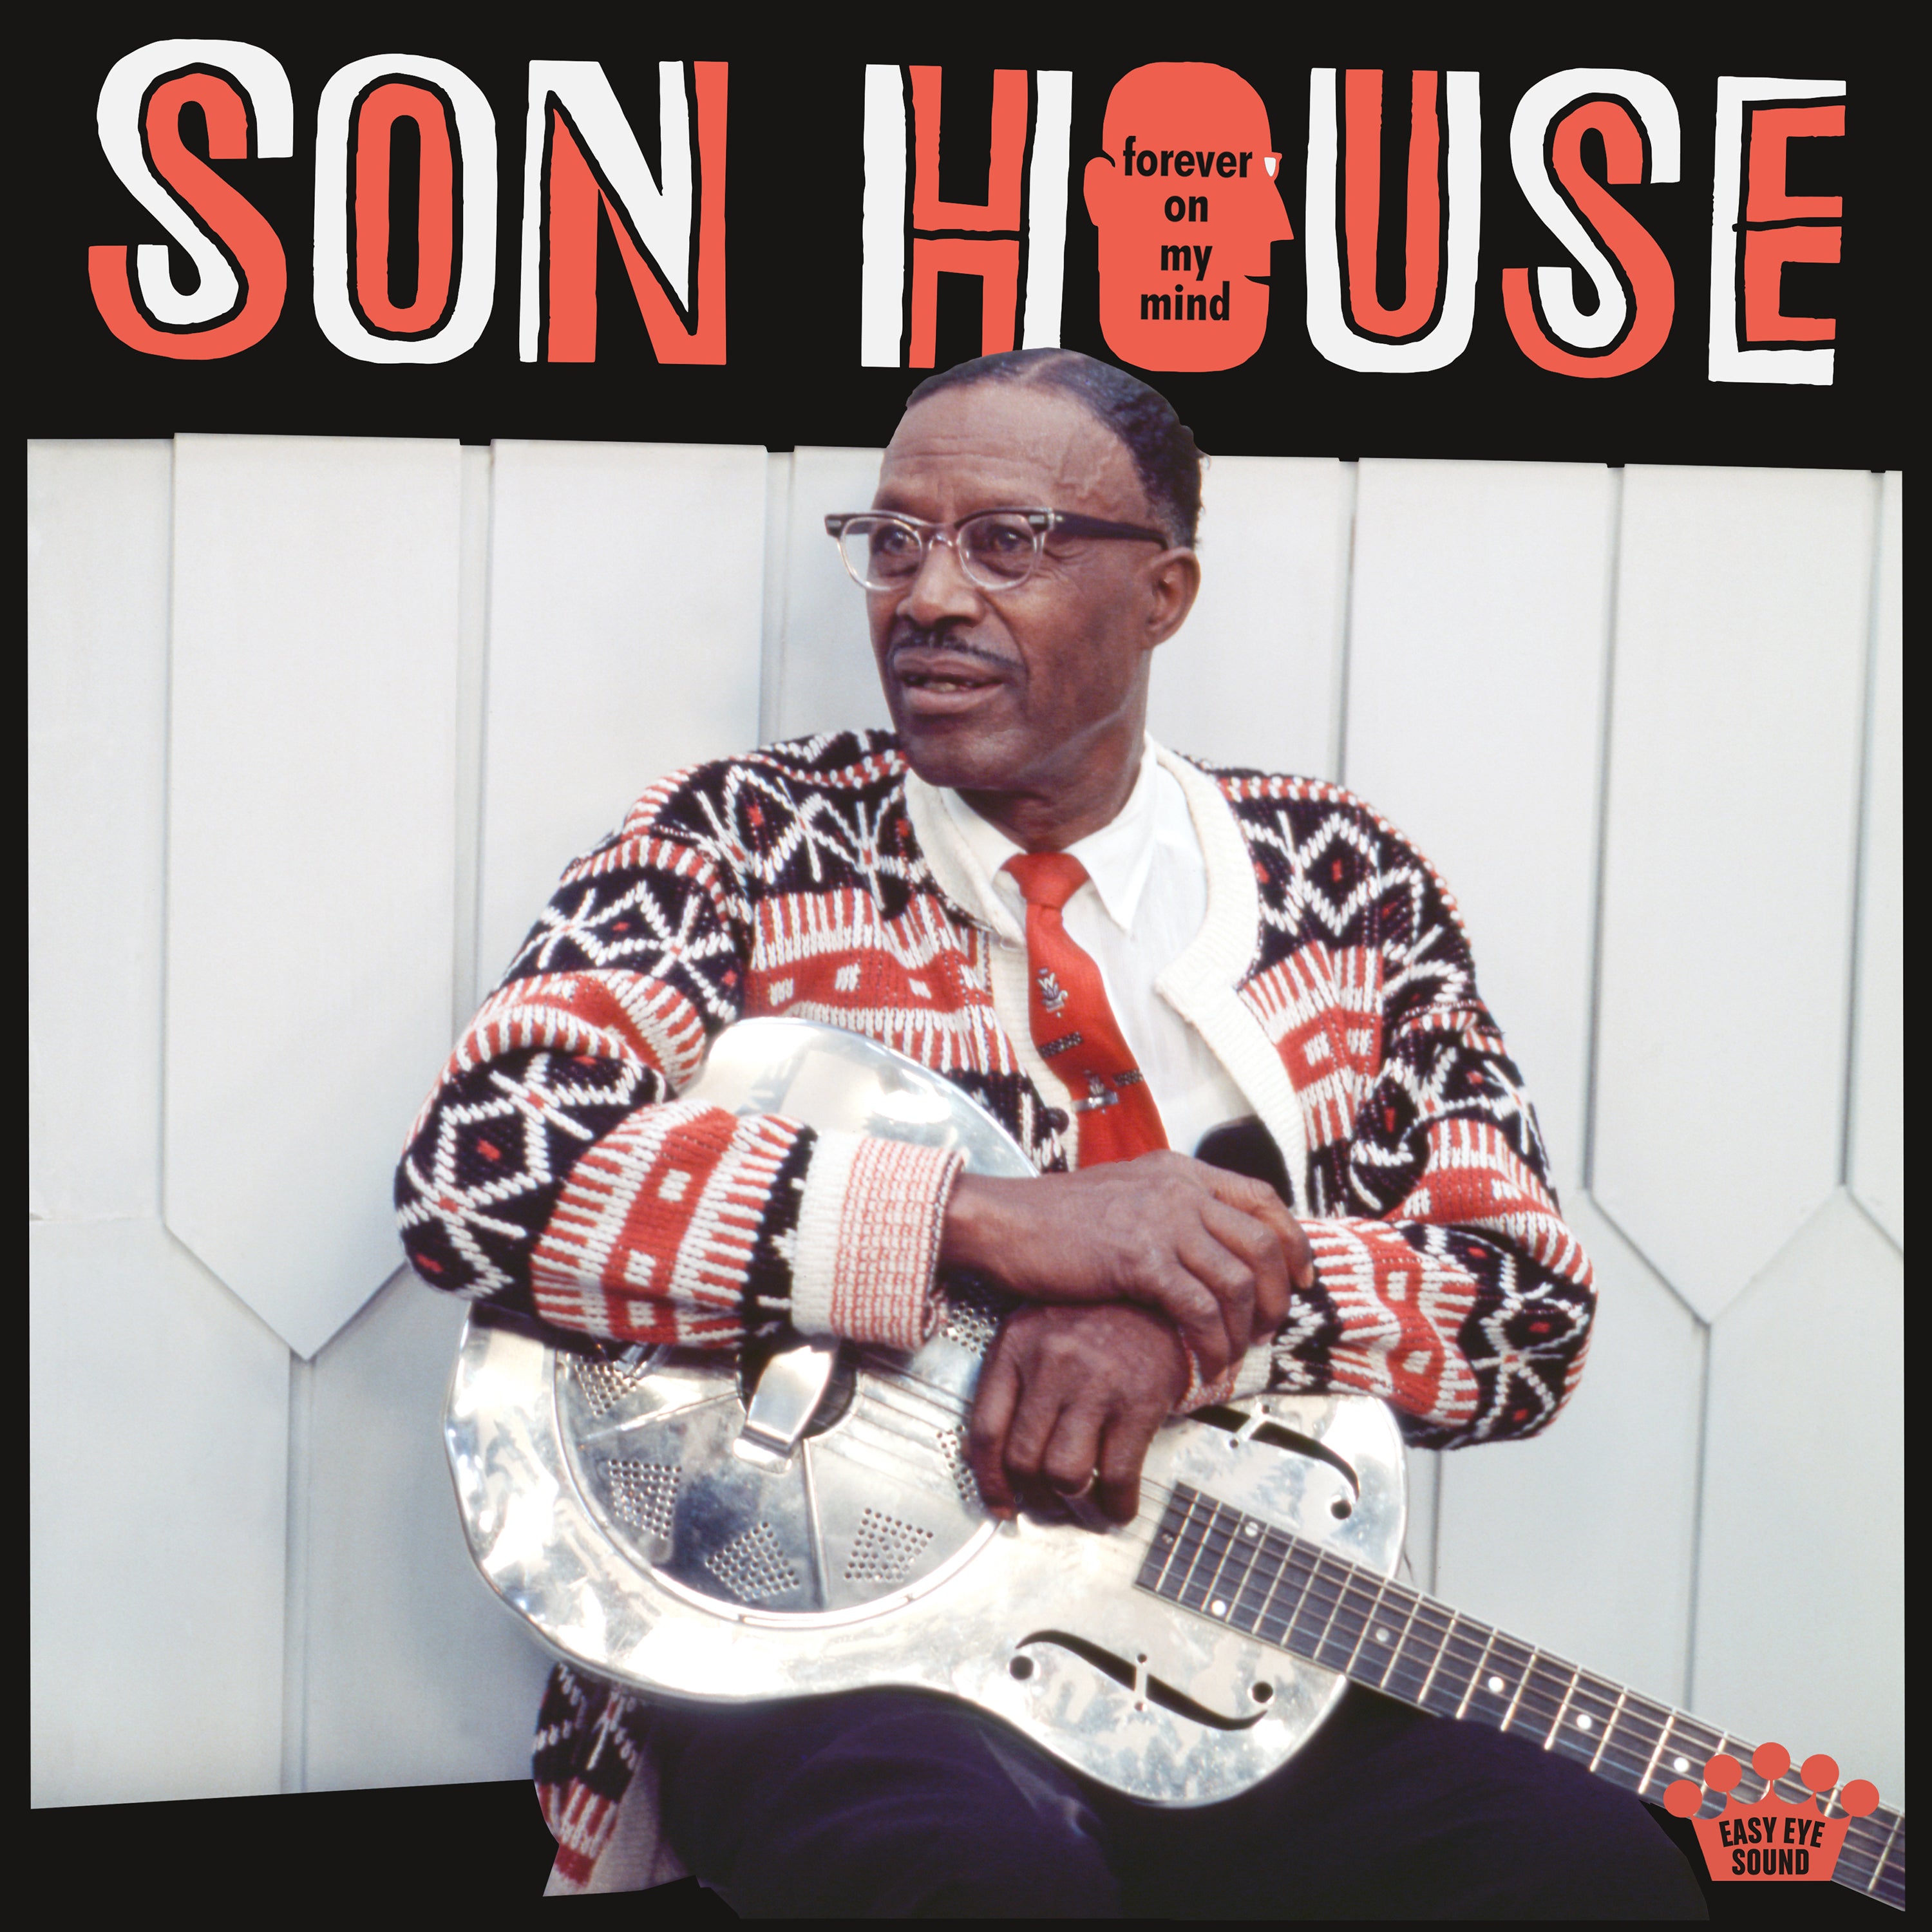 The new album from the Father of the Delta Blues, Son House, is available now